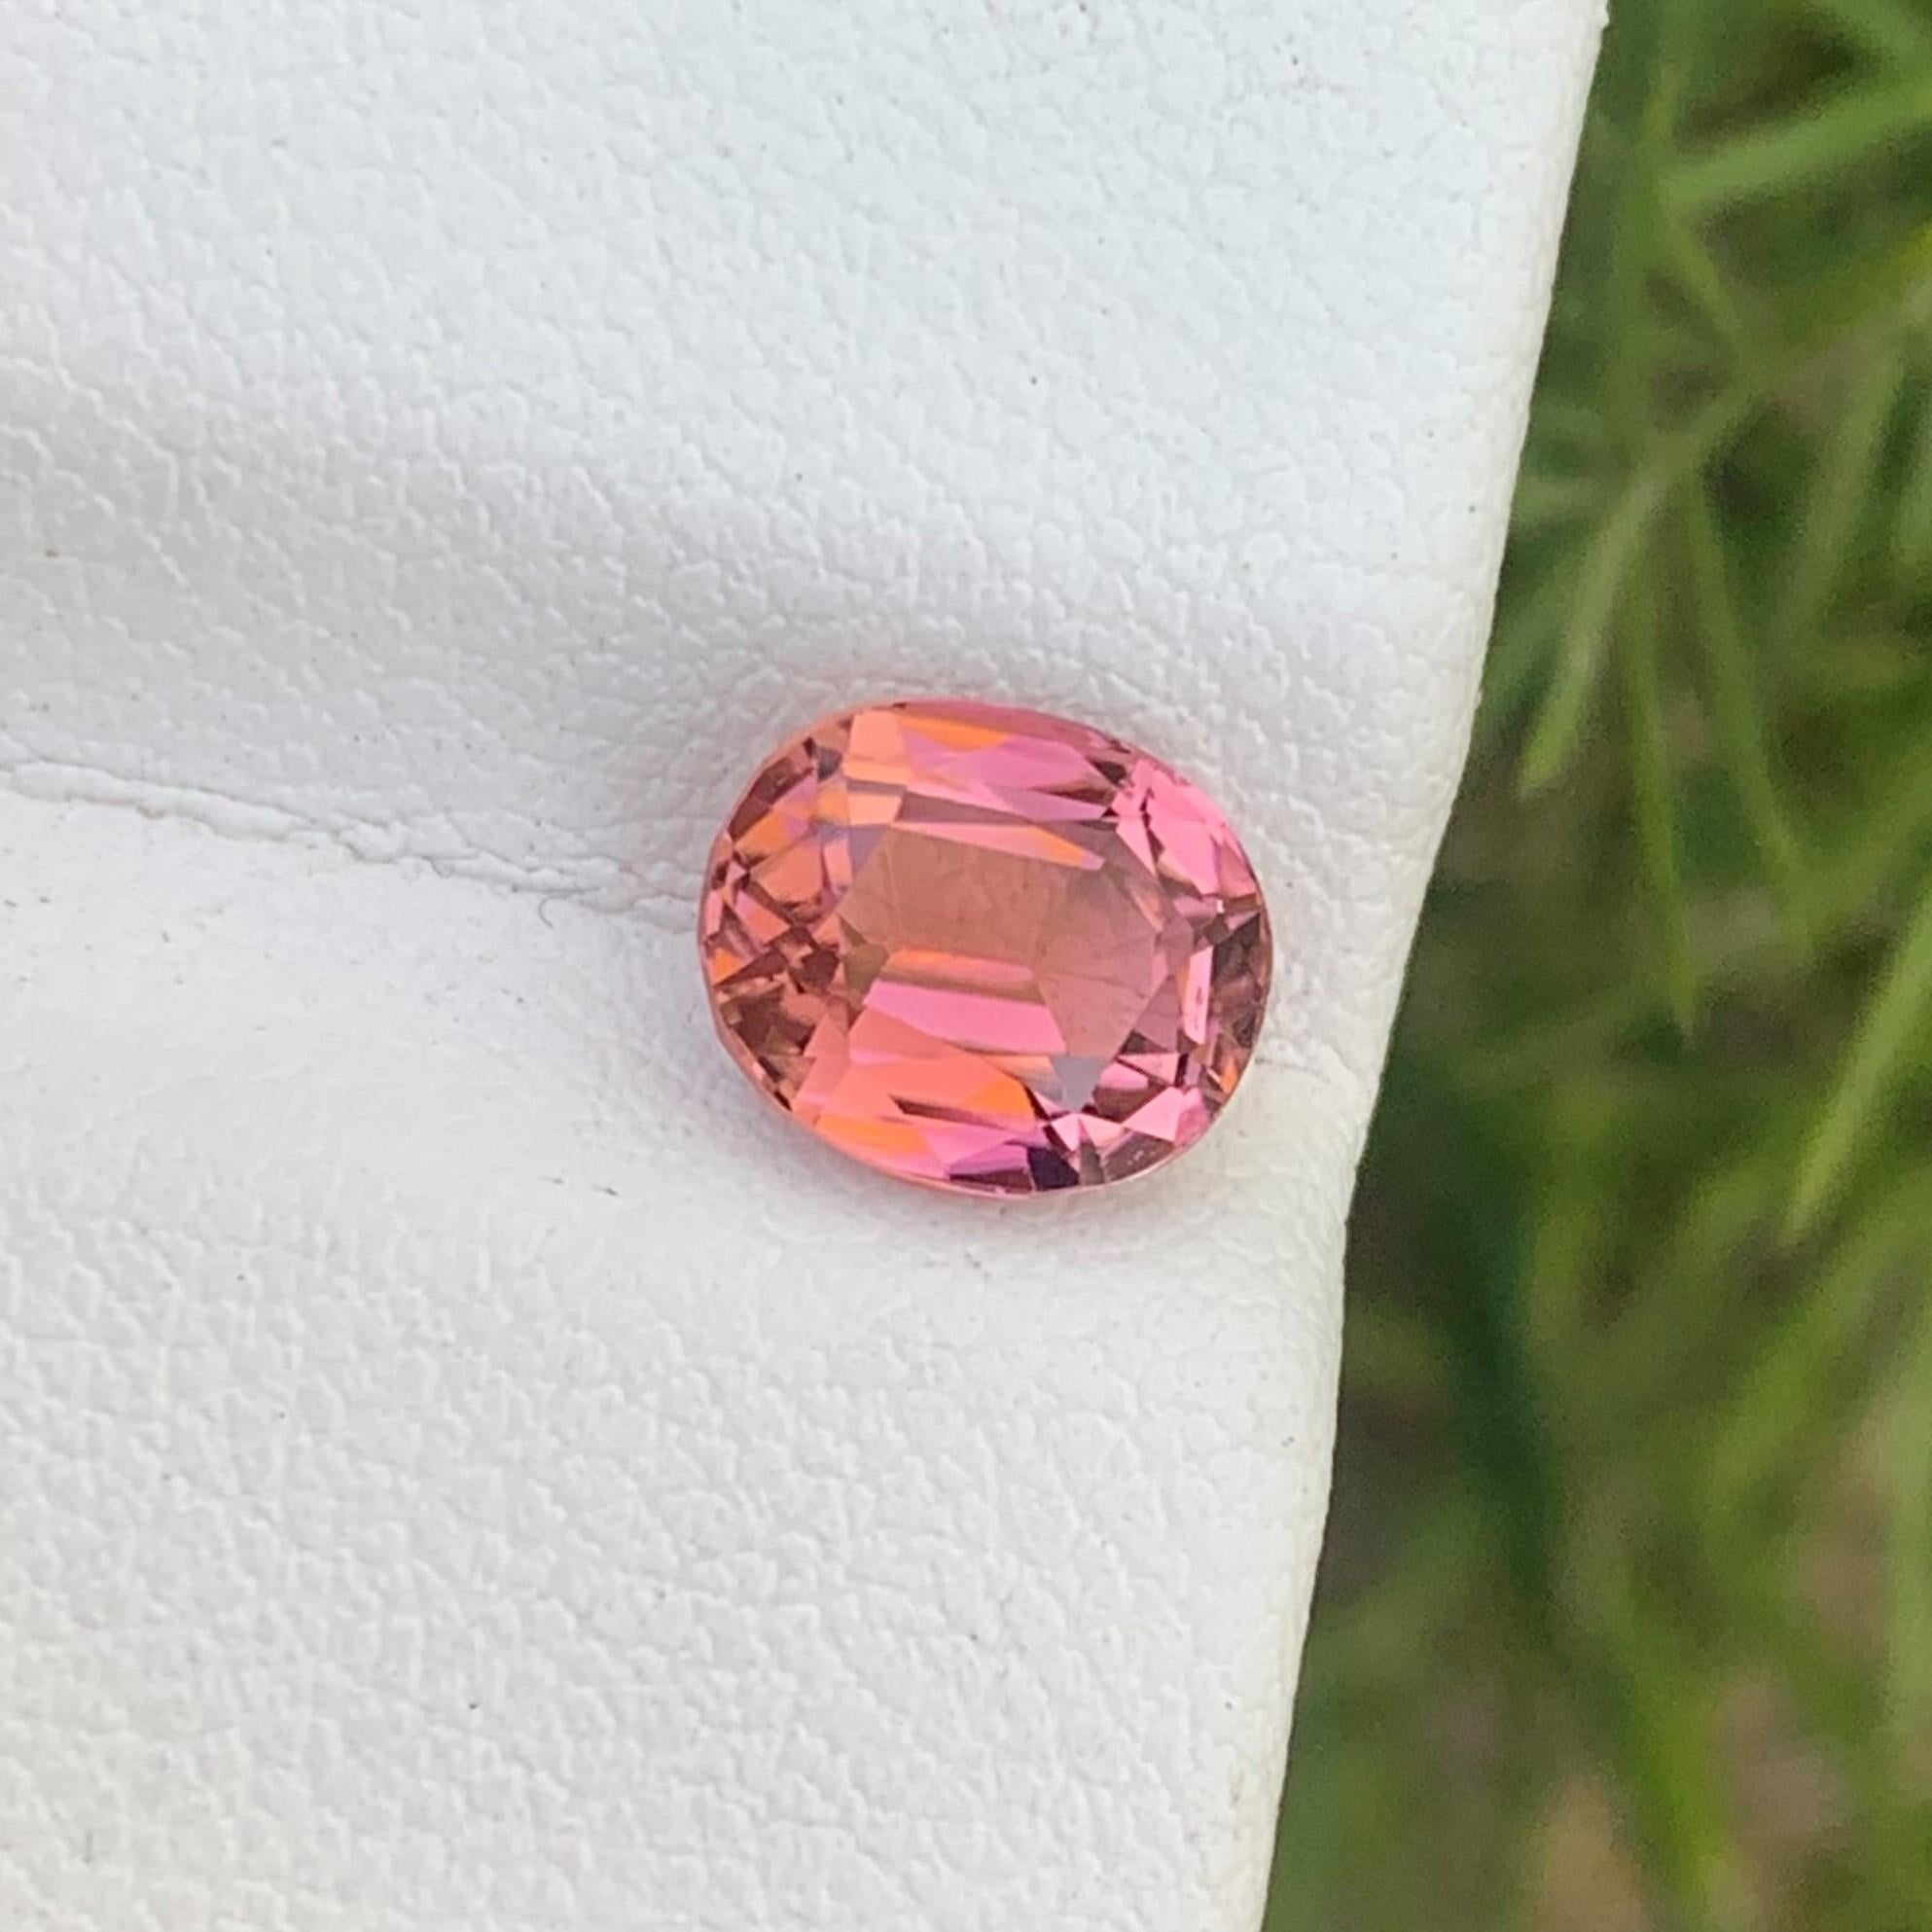 Faceted Tourmaline
Weight: 1.70 Carats
Dimension: 7.7x6.5x4.9 Mm
Origin: Afghanistan
Color: Pink
Shape: Oval
Cut:Cushion
Clarity: Eye Clean
Certificate: On Demand

With a rating between 7 and 7.5 on the Mohs scale of mineral hardness, tourmaline